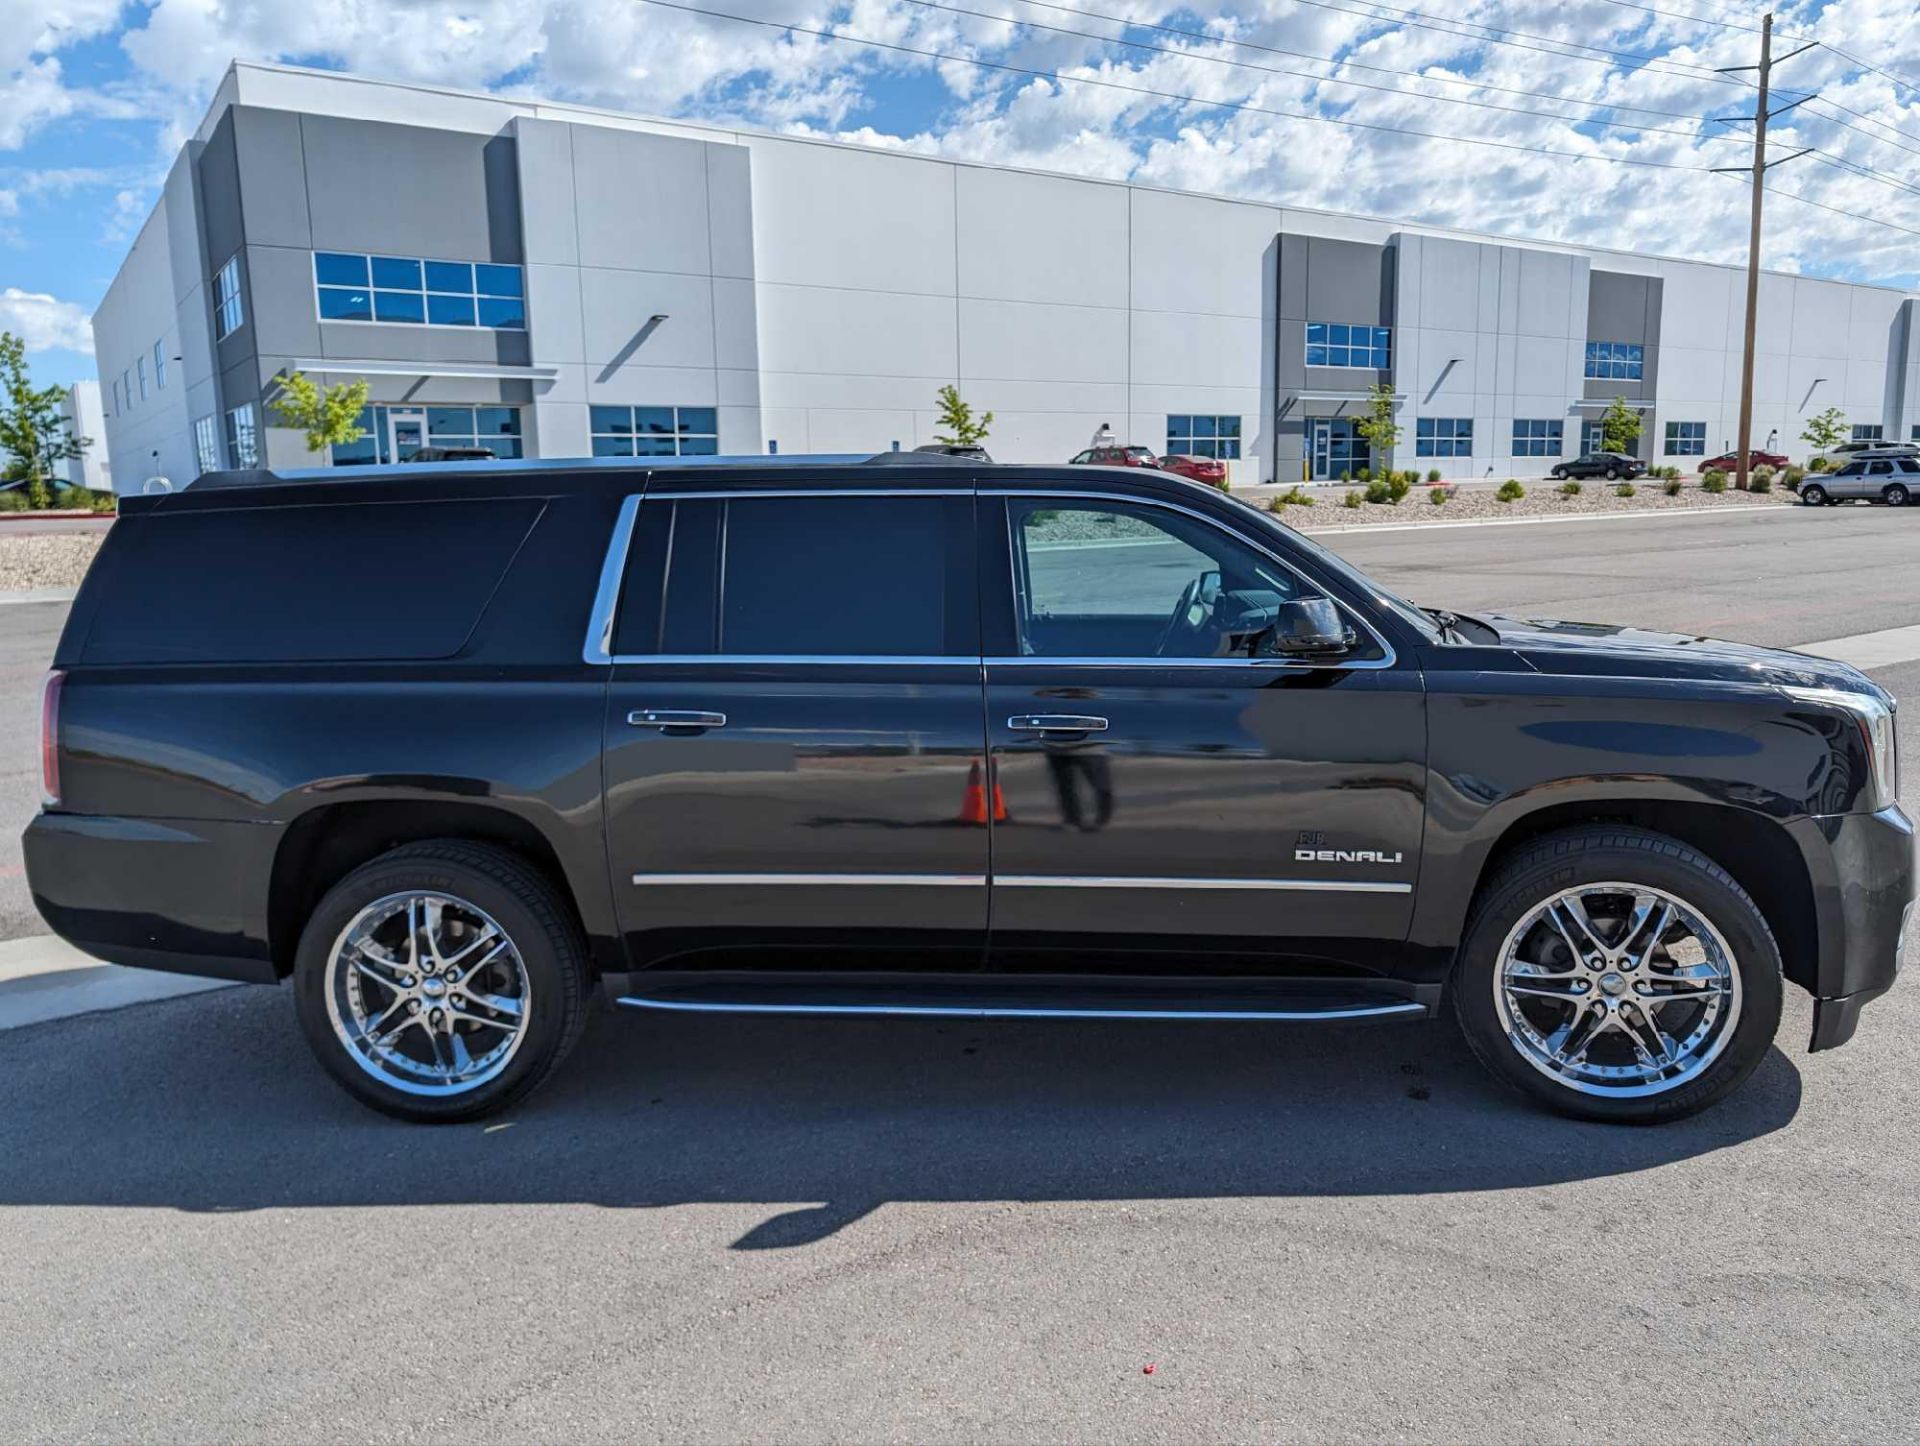 2017 GMC Yukon XL Denali w/ 111K Miles, 4wd, v8 VIN #: 1GKS2HKJ4HR323051 Features & notes: runs and - Image 4 of 16